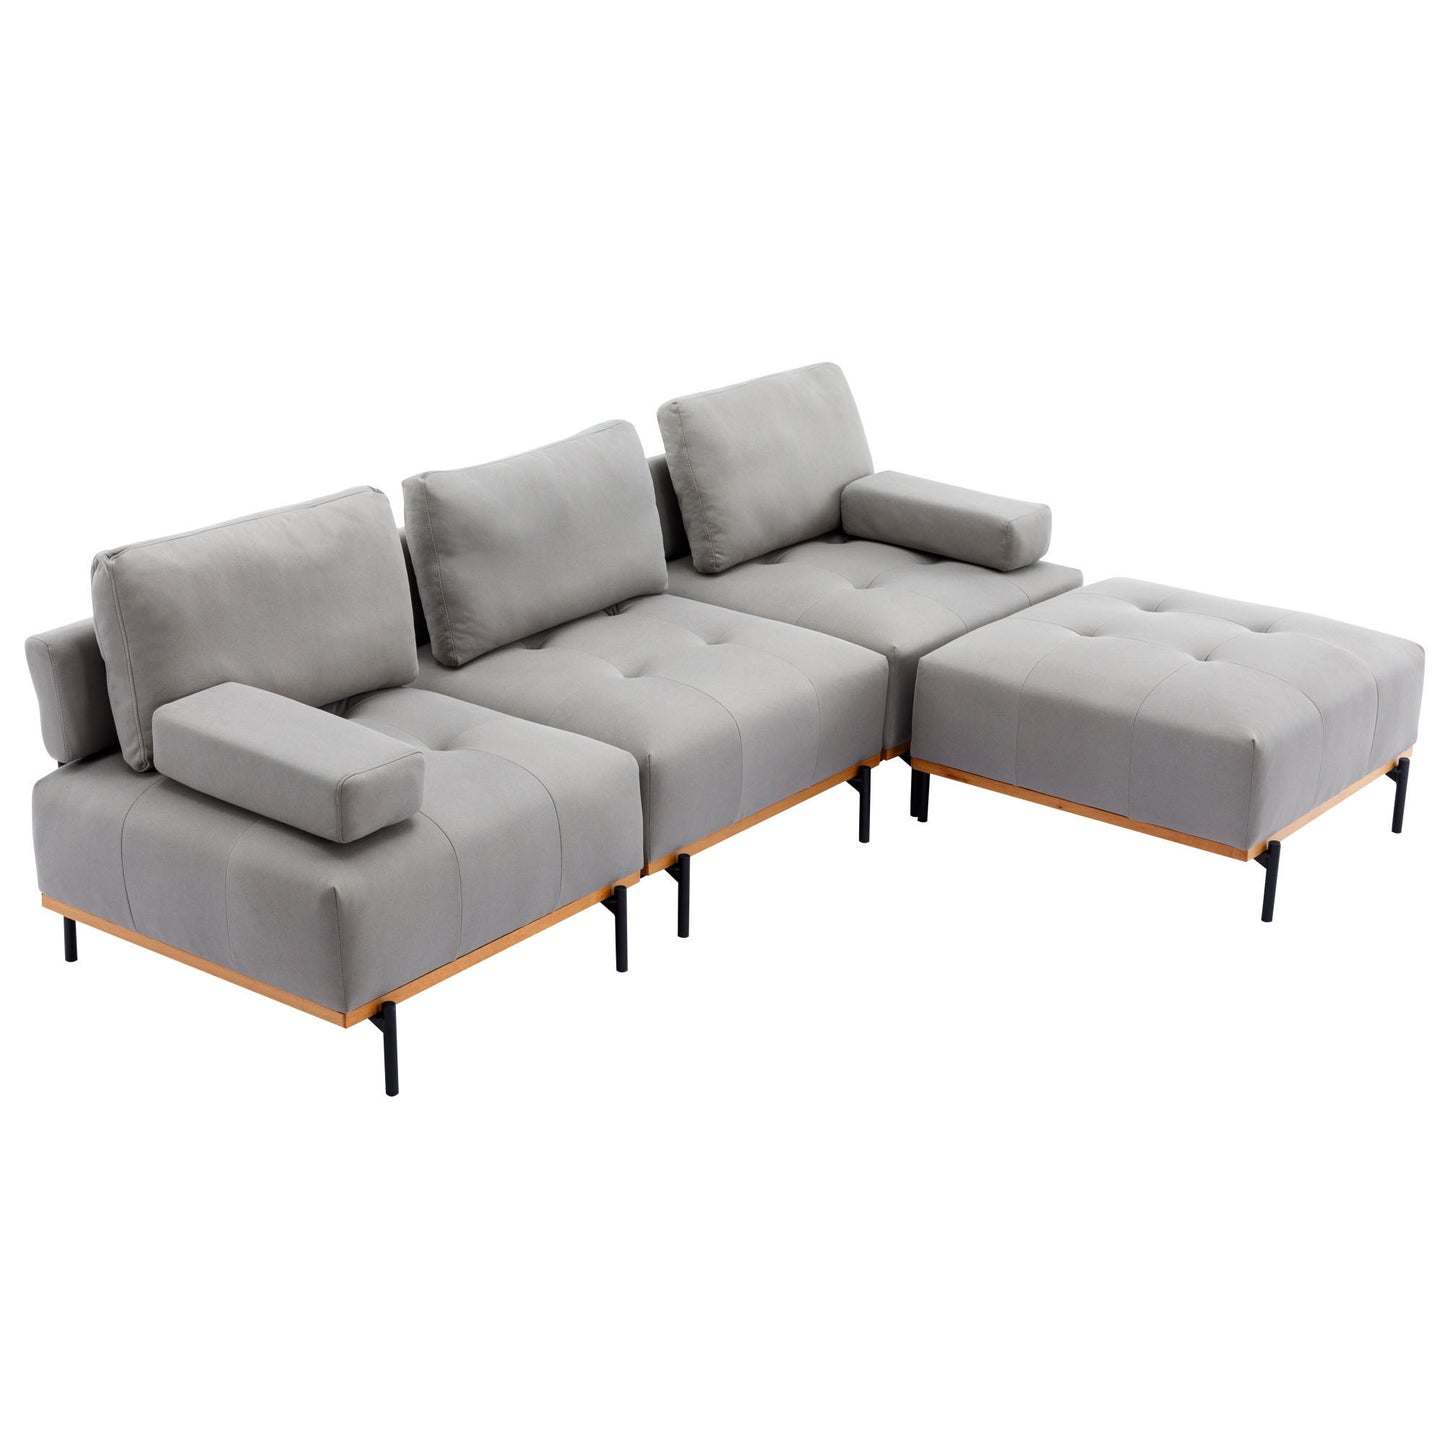 L-Shaped Sectional Sofa with Removable Ottoman in Grey Fabric